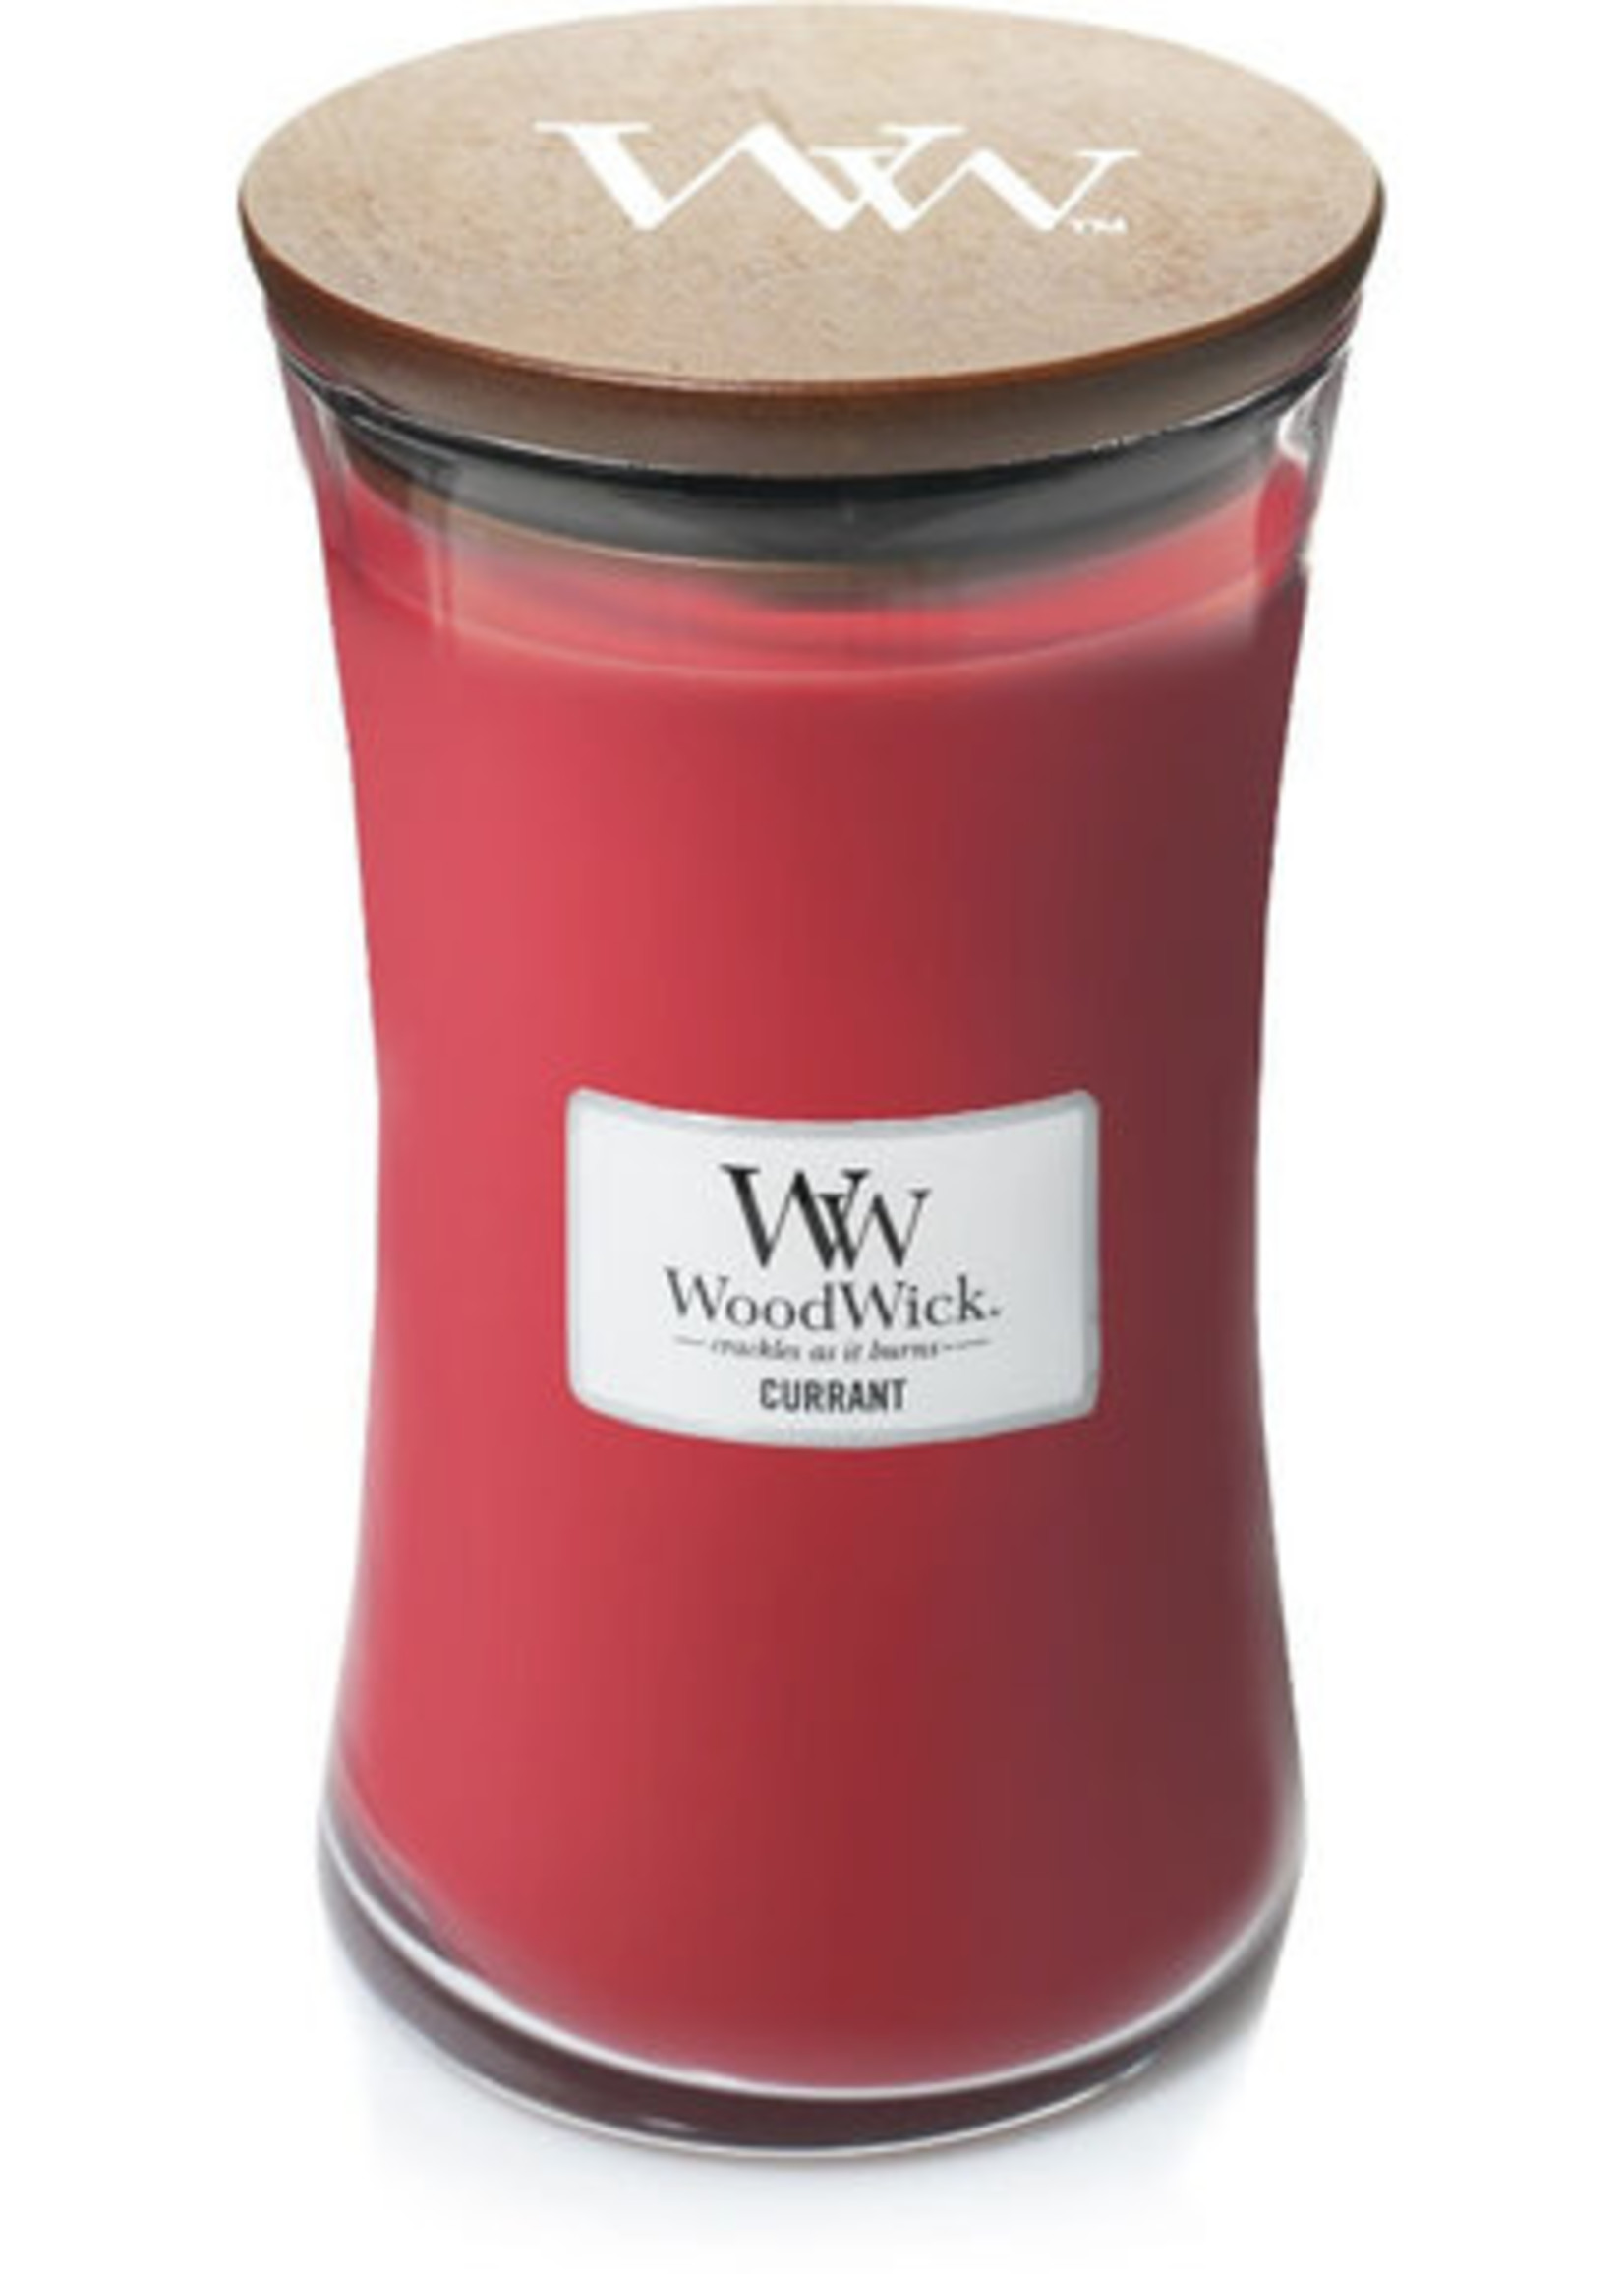 Woodwick WW Currant Large Candle